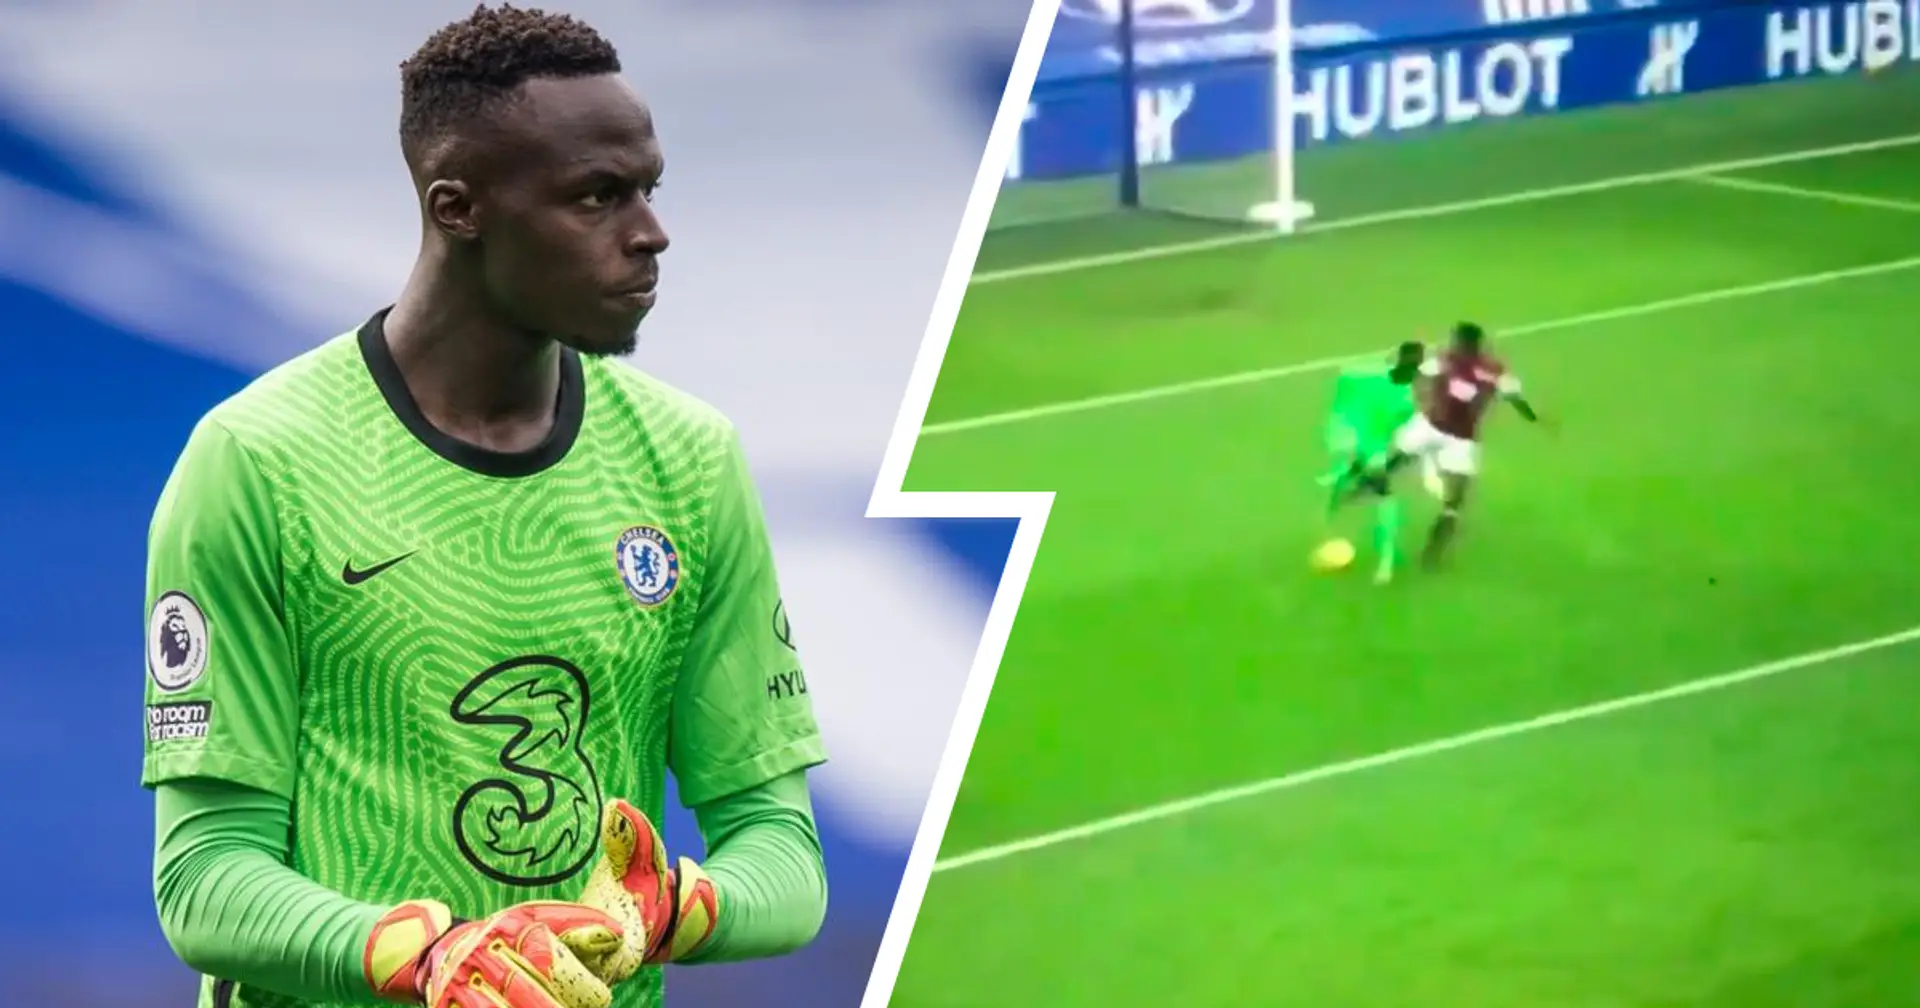 Edouard Mendy's risky trick in his own box deserves a closer look